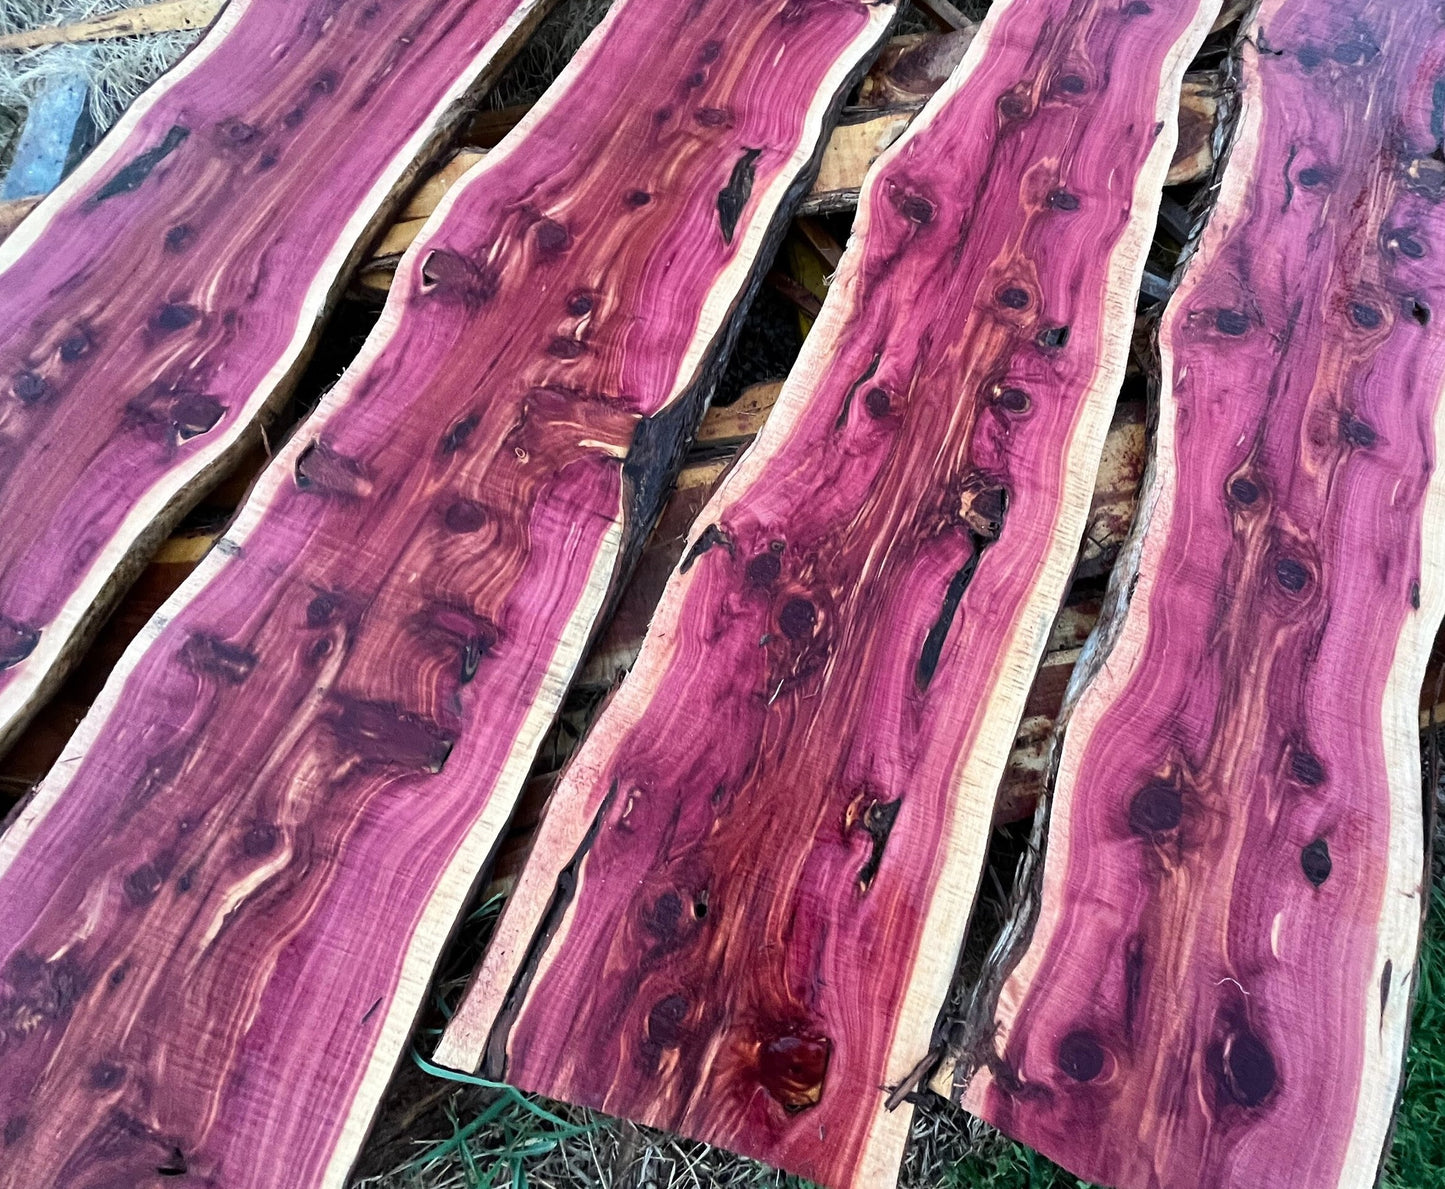 1" Thick Rough Cut Eastern Red Cedar Live Edge Slabs for Charcuterie Boards, Furniture, Table and Bar Tops, Shelves, and More - Kiln Dried